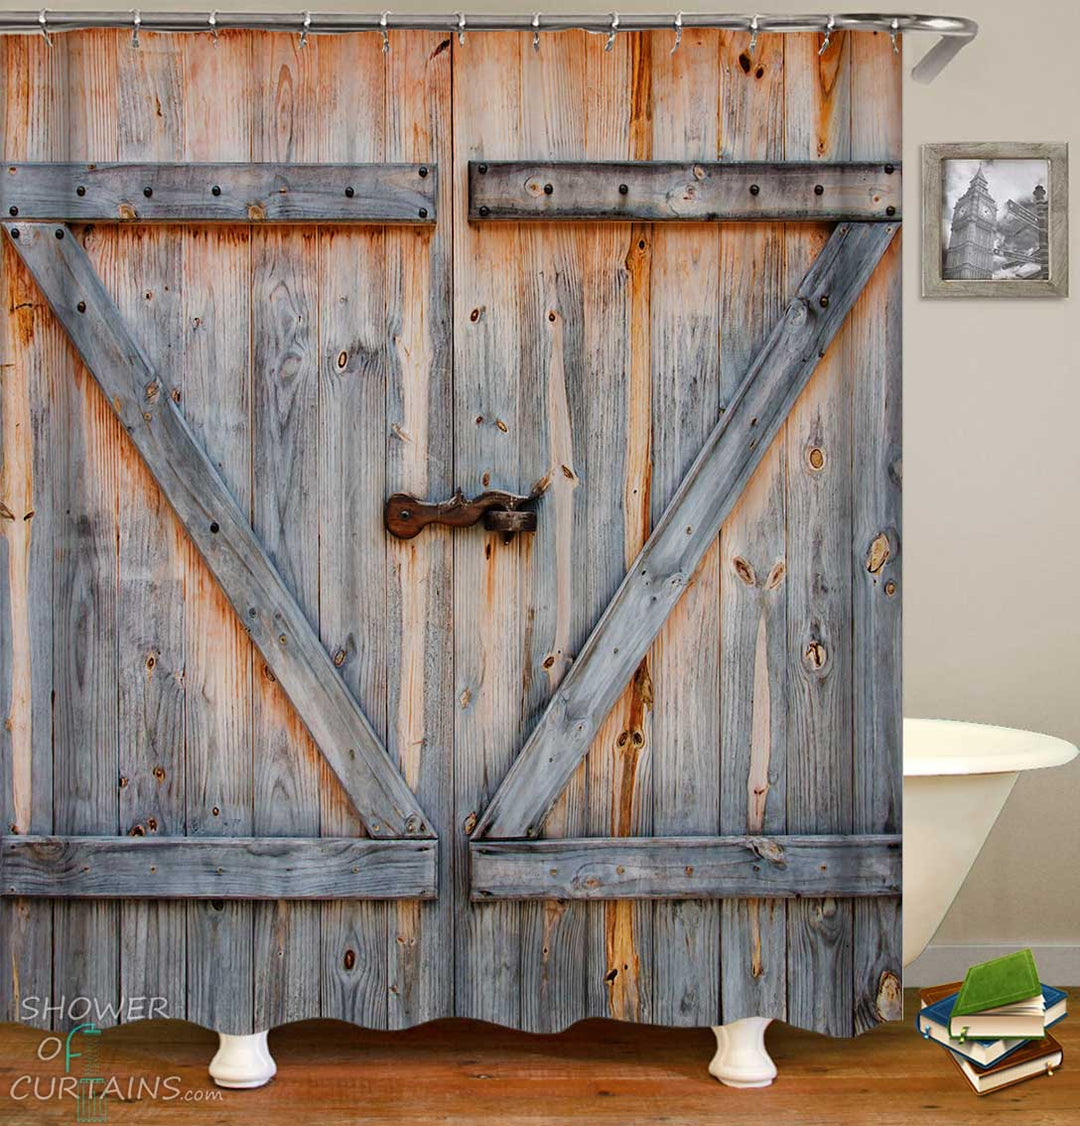 Shower Curtains with Wooden Barn Door